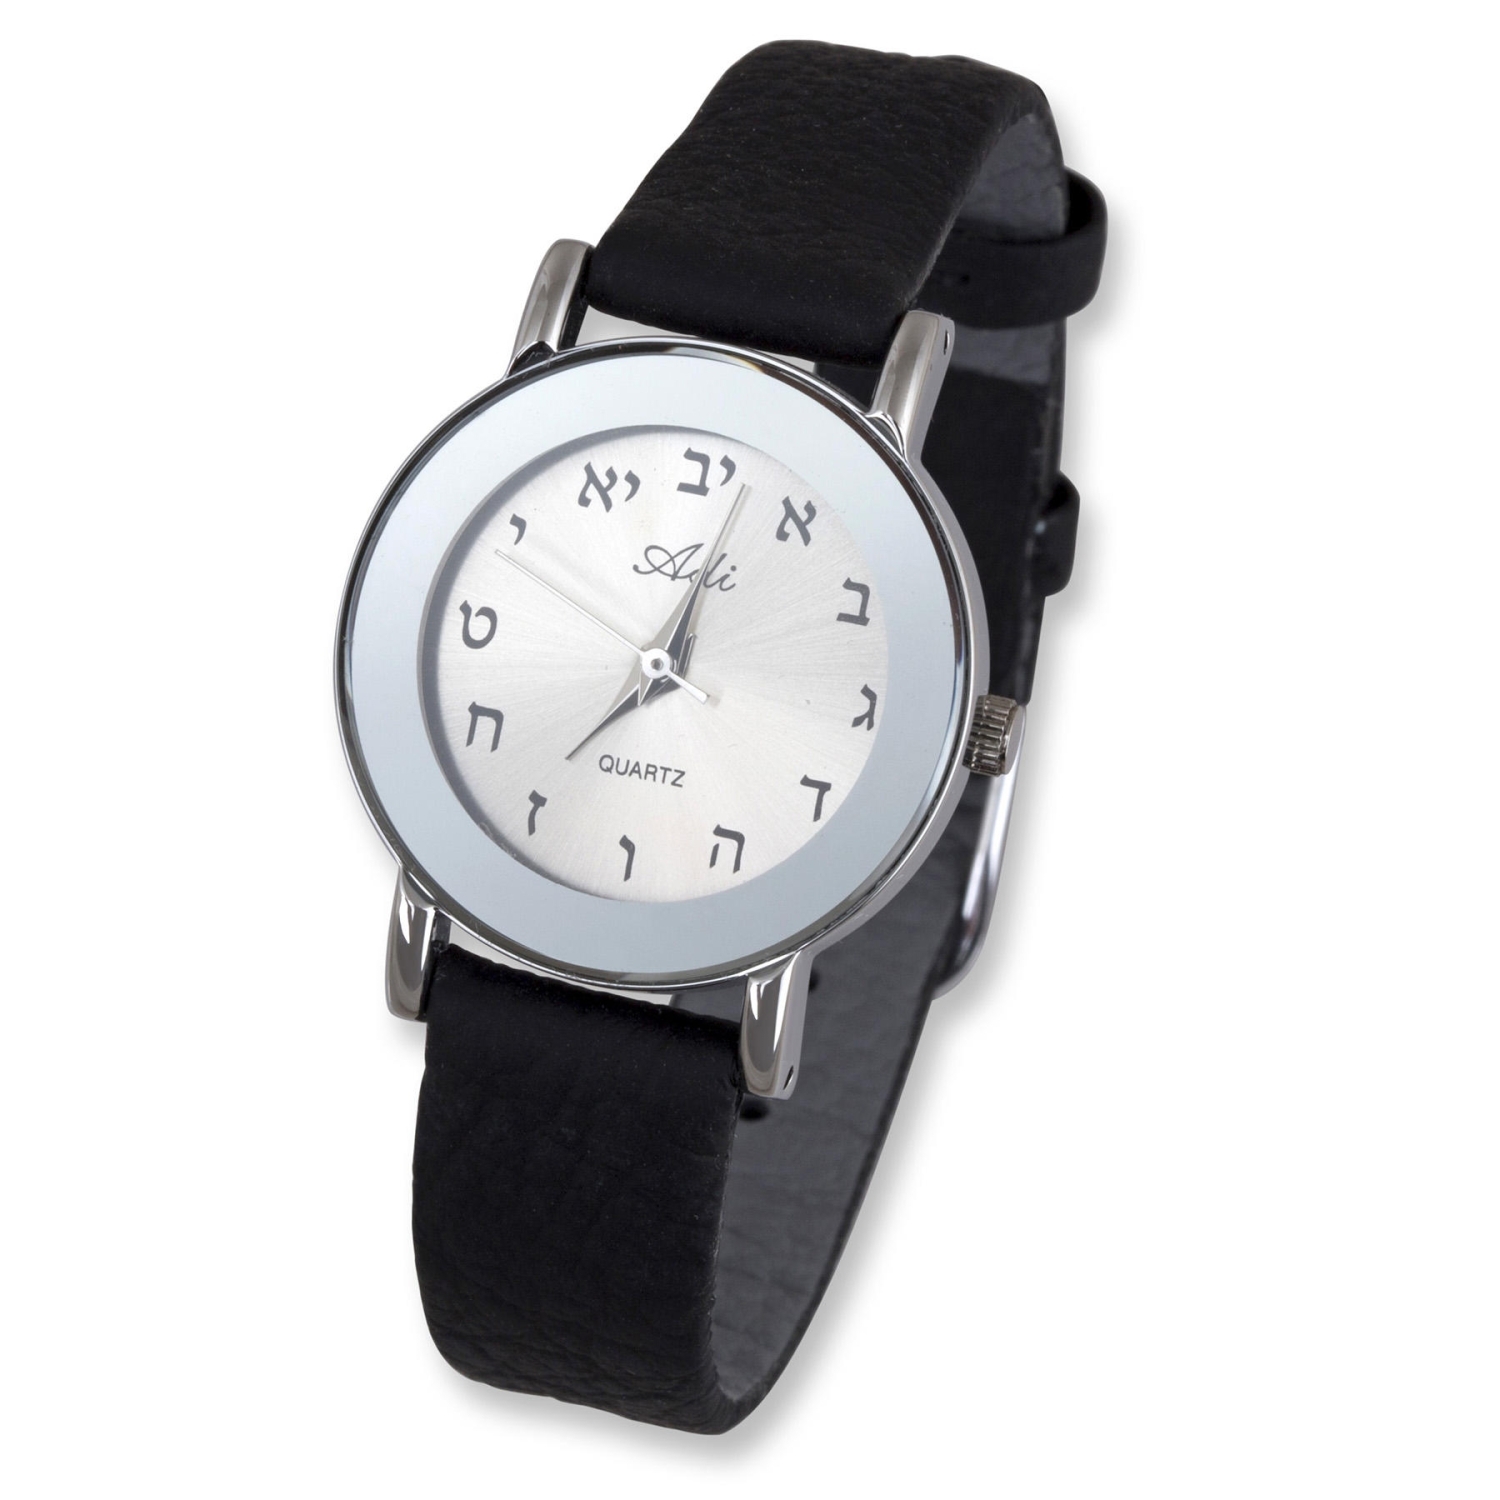 Adi Women's Hebrew Letters Watch with Black Leather Band - 1